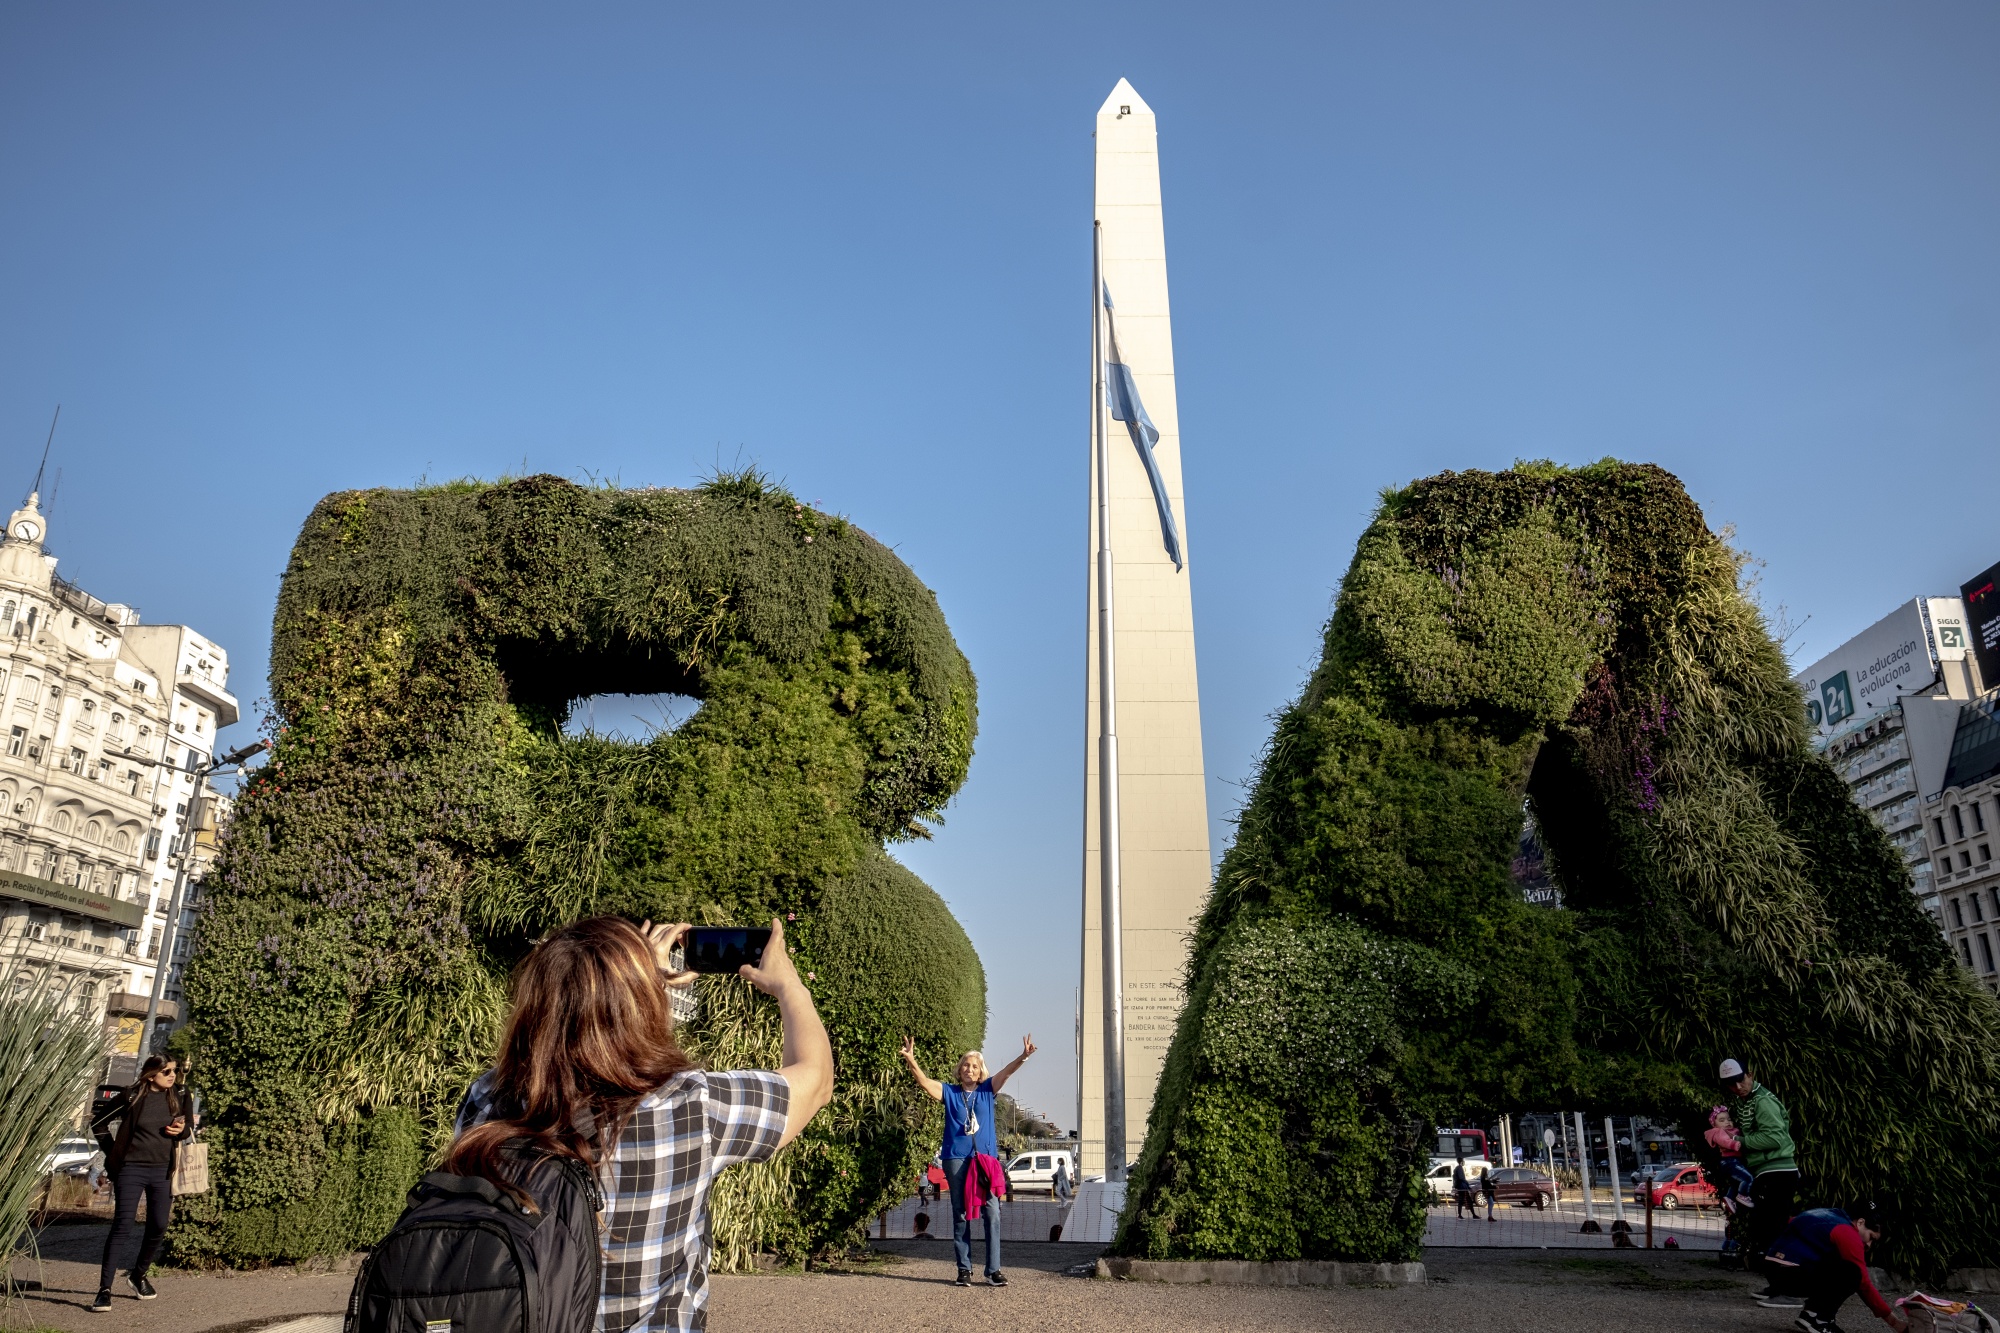 Tourists take photos in front of the Obelisk in Buenos Aires, Argentina, on Wednesday, Aug. 24, 2022.